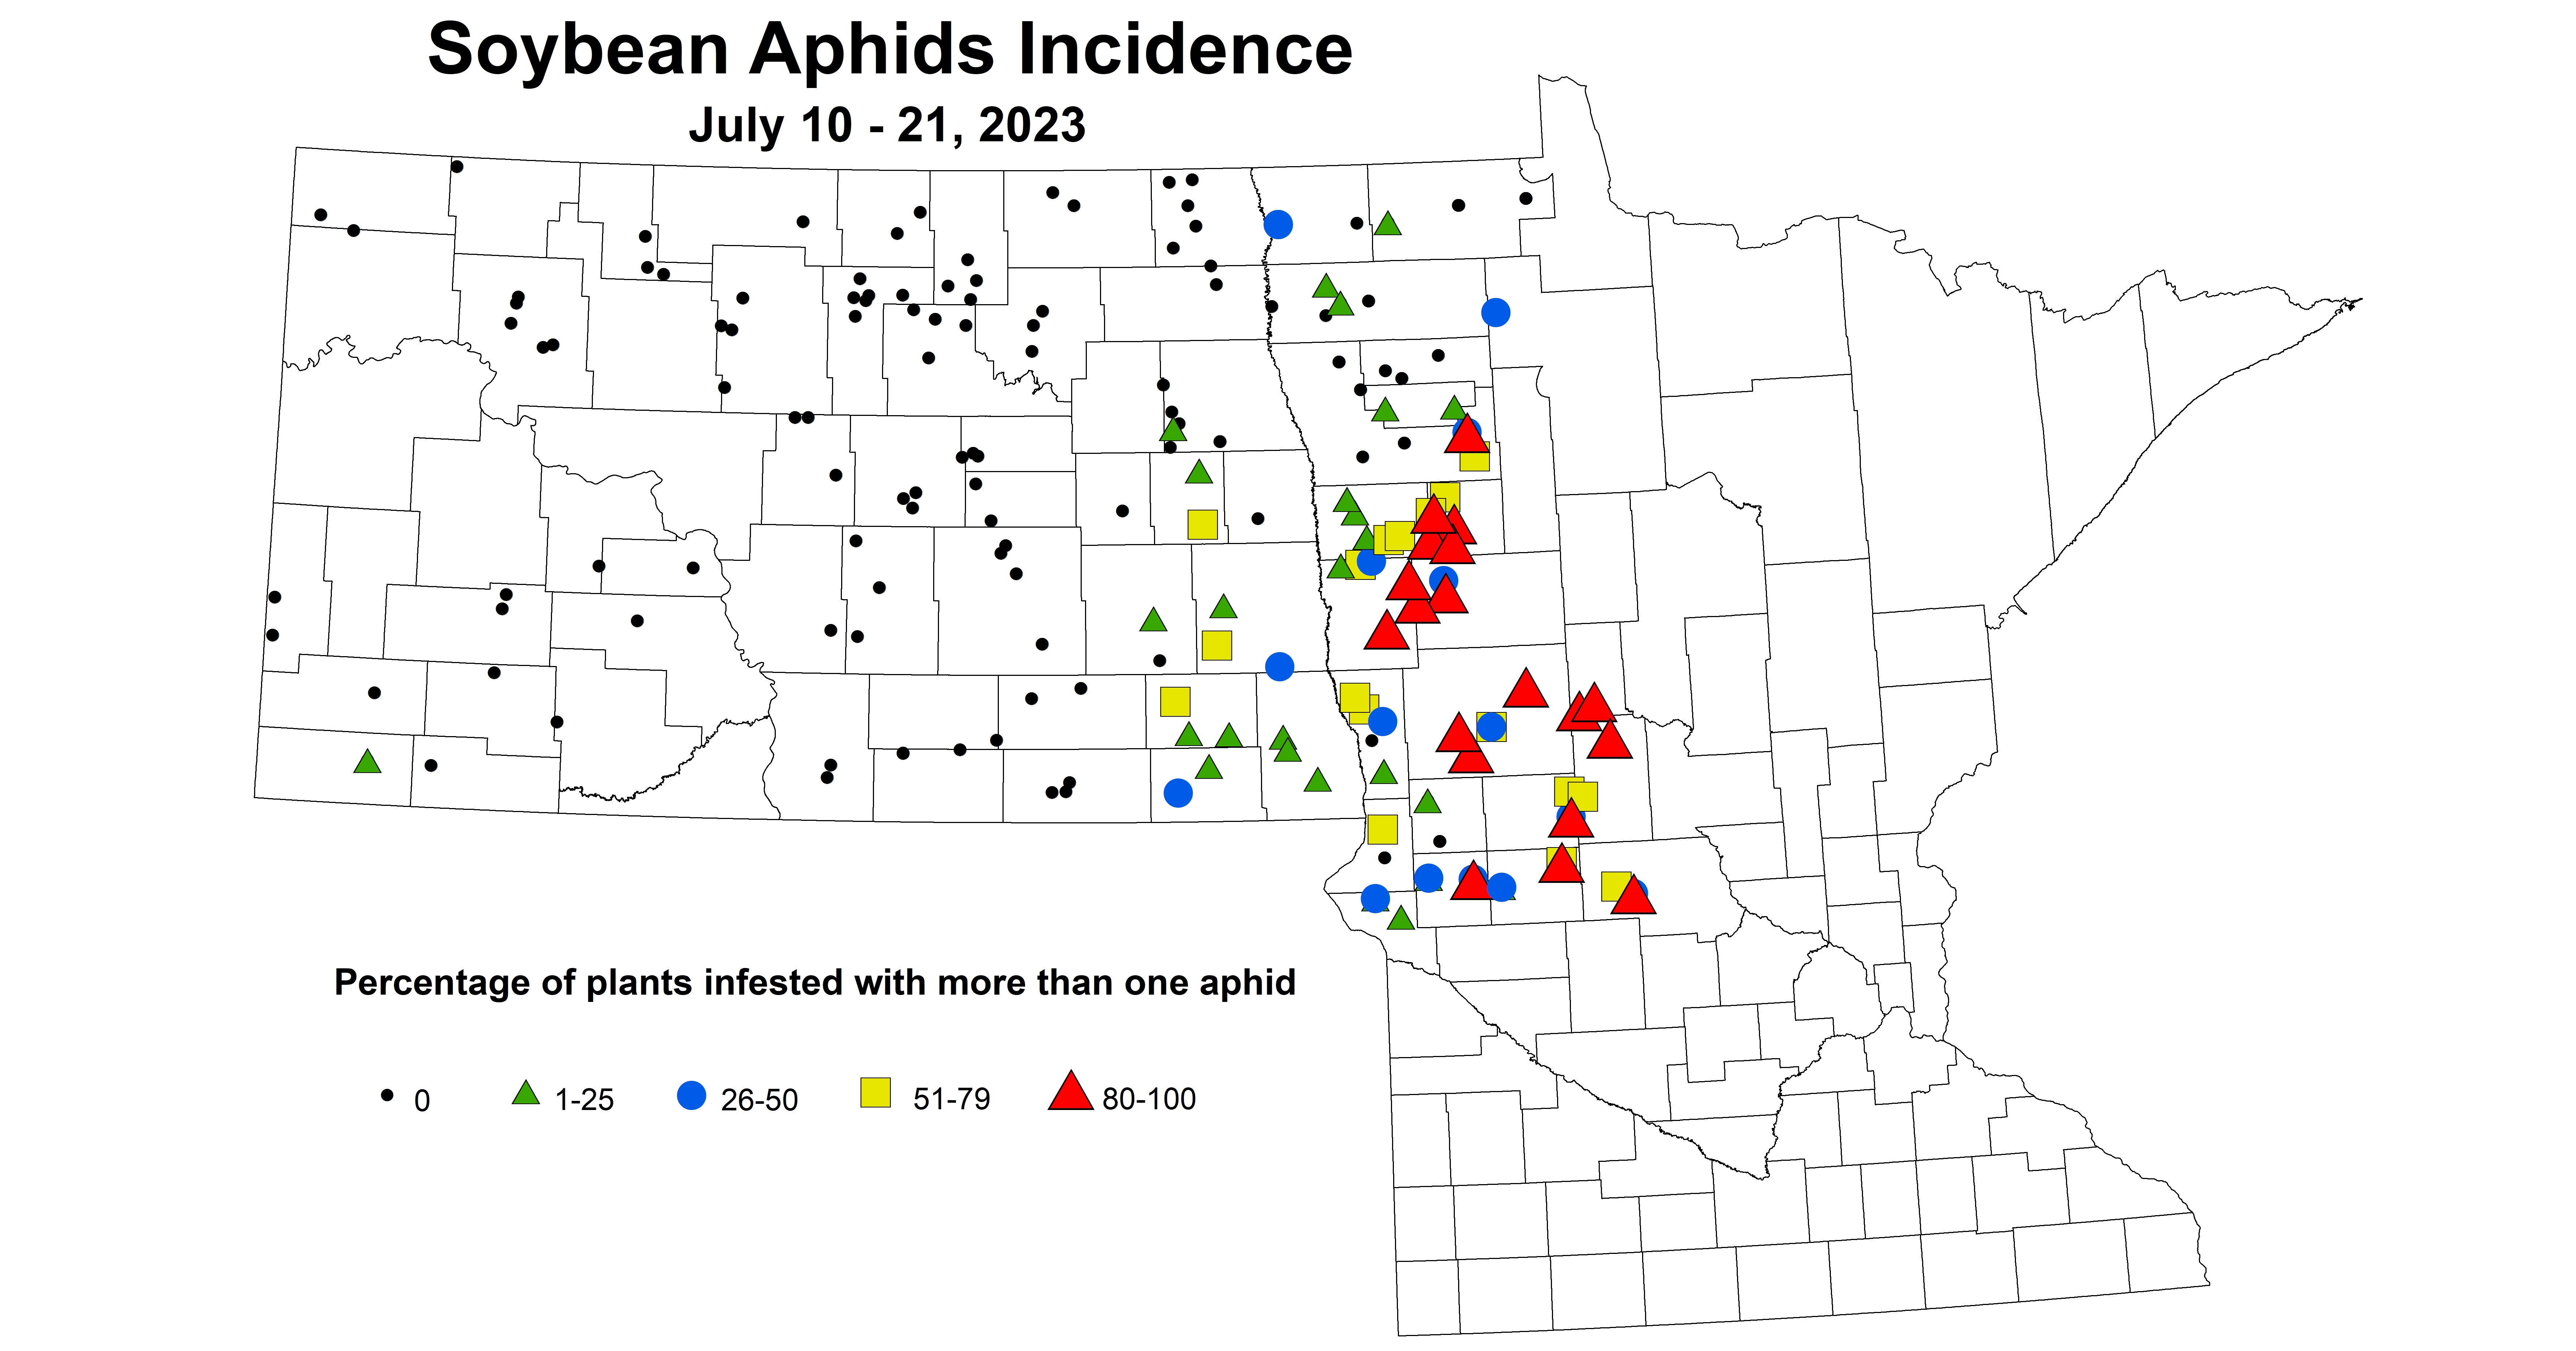 soybean aphid incidence July 10-21 2023